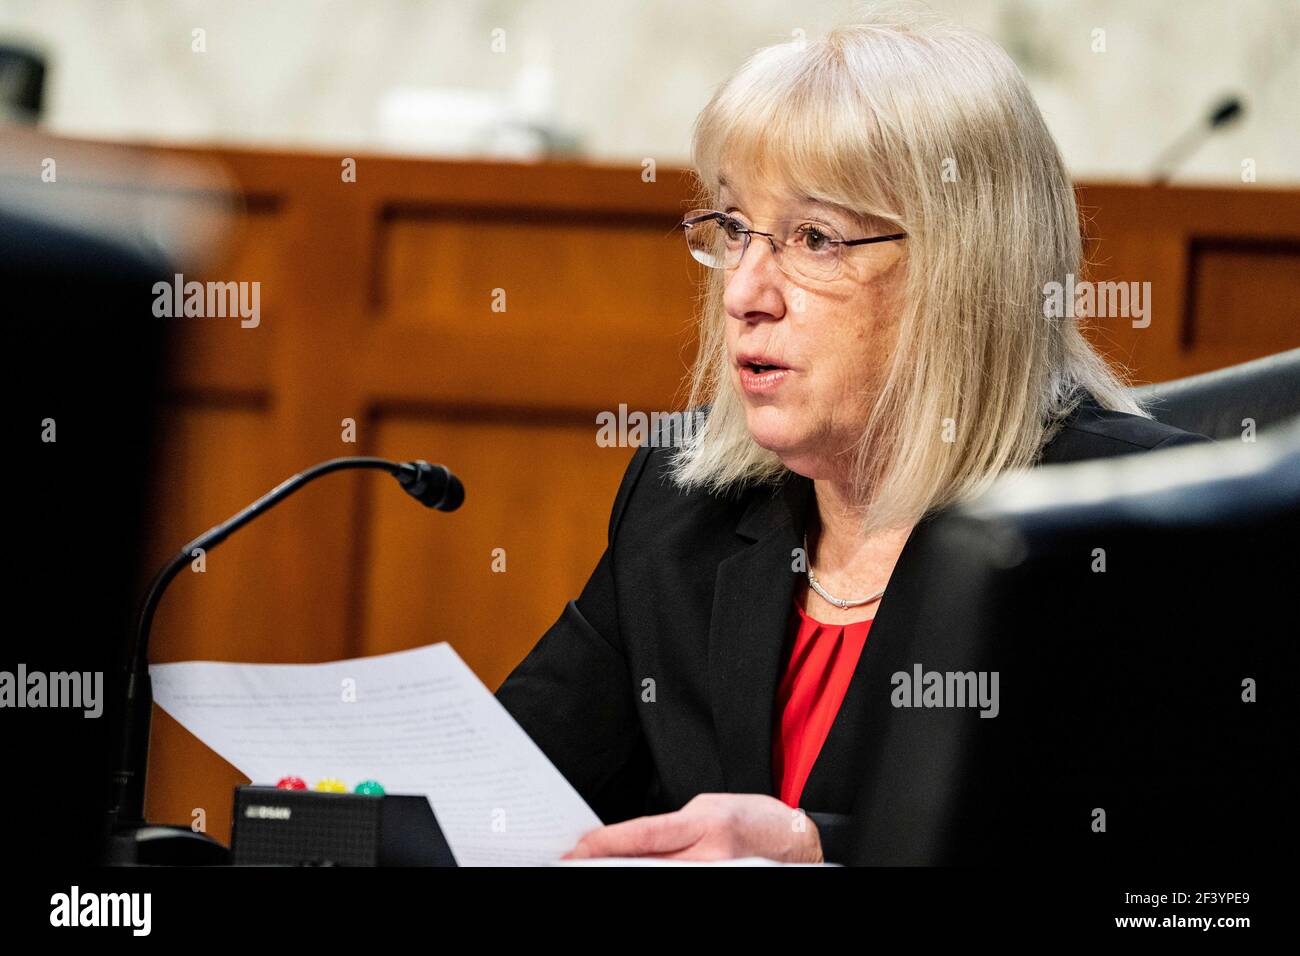 Washington, United States. 18th Mar, 2021. Senator Patty Murray, D-Wash., Chairwoman of the Senate Committee on Health, Education, Labor, and Pensions, speaks at a hearing with the Senate Committee on Health, Education, Labor, and Pensions on the Covid-19 response on Capitol Hill in Washington March 18th, 2021. Pool Photo by Anna Moneymaker Credit: UPI/Alamy Live News Stock Photo